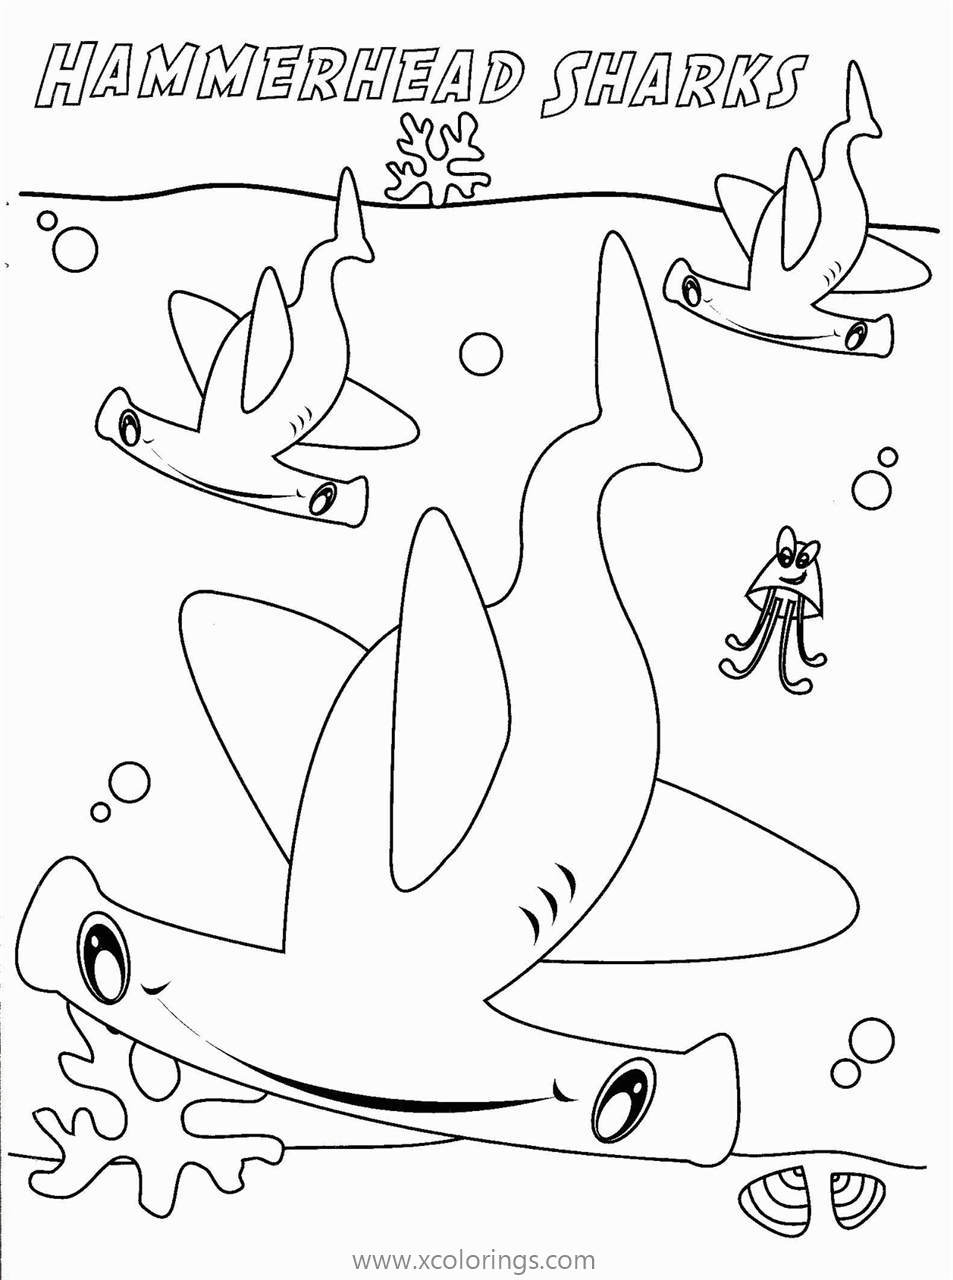 Free Three Hammerhead Sharks Coloring Pages printable